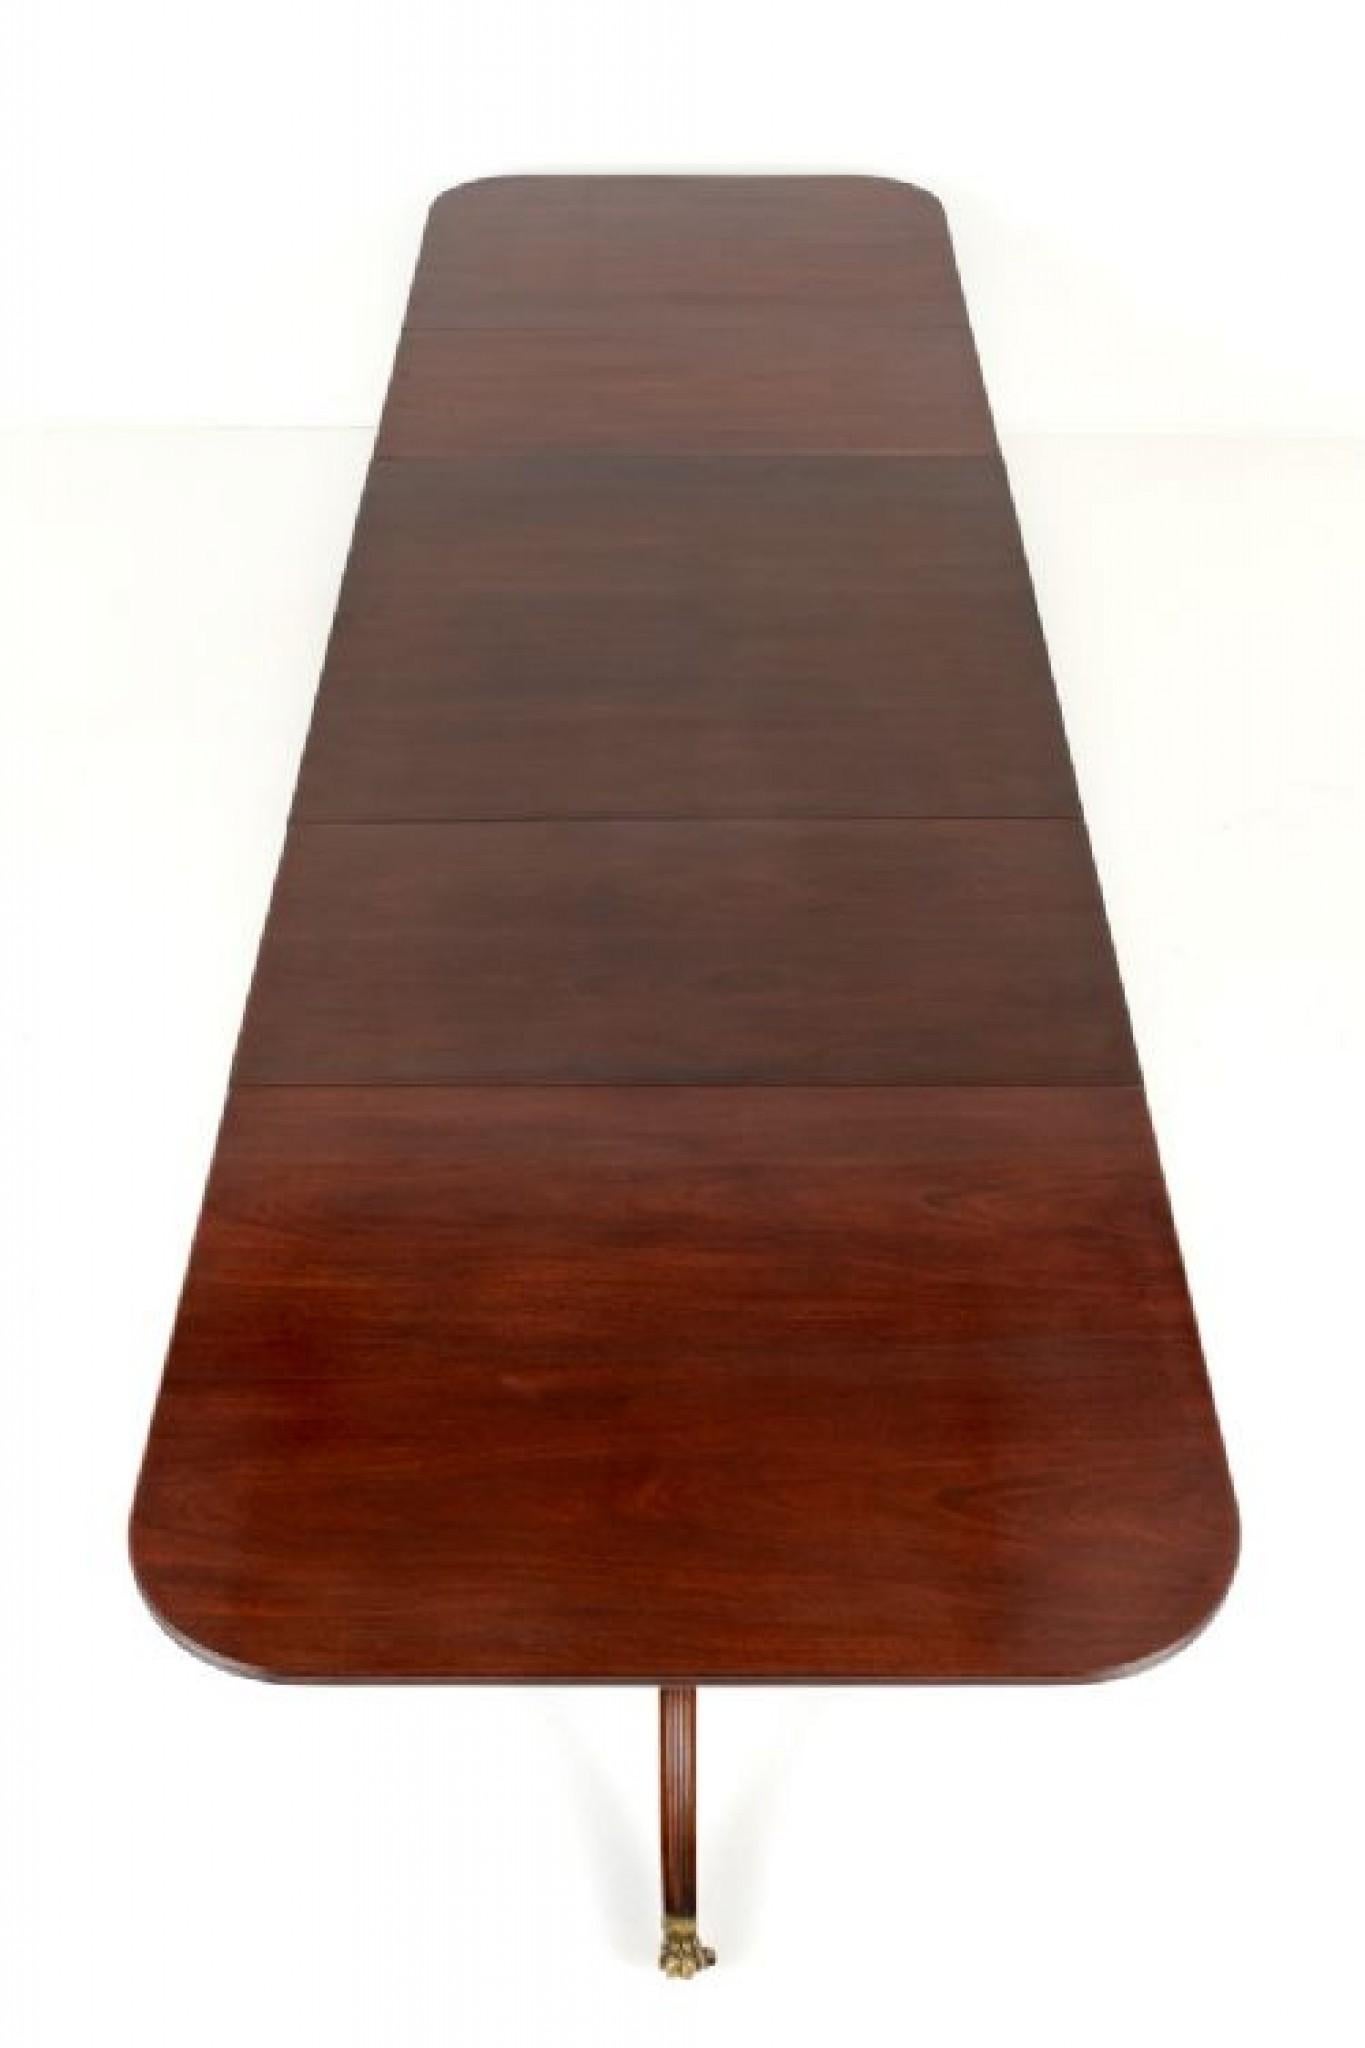 Large Regency Dining Table Pedestal 18 Seater Mahogany For Sale 2